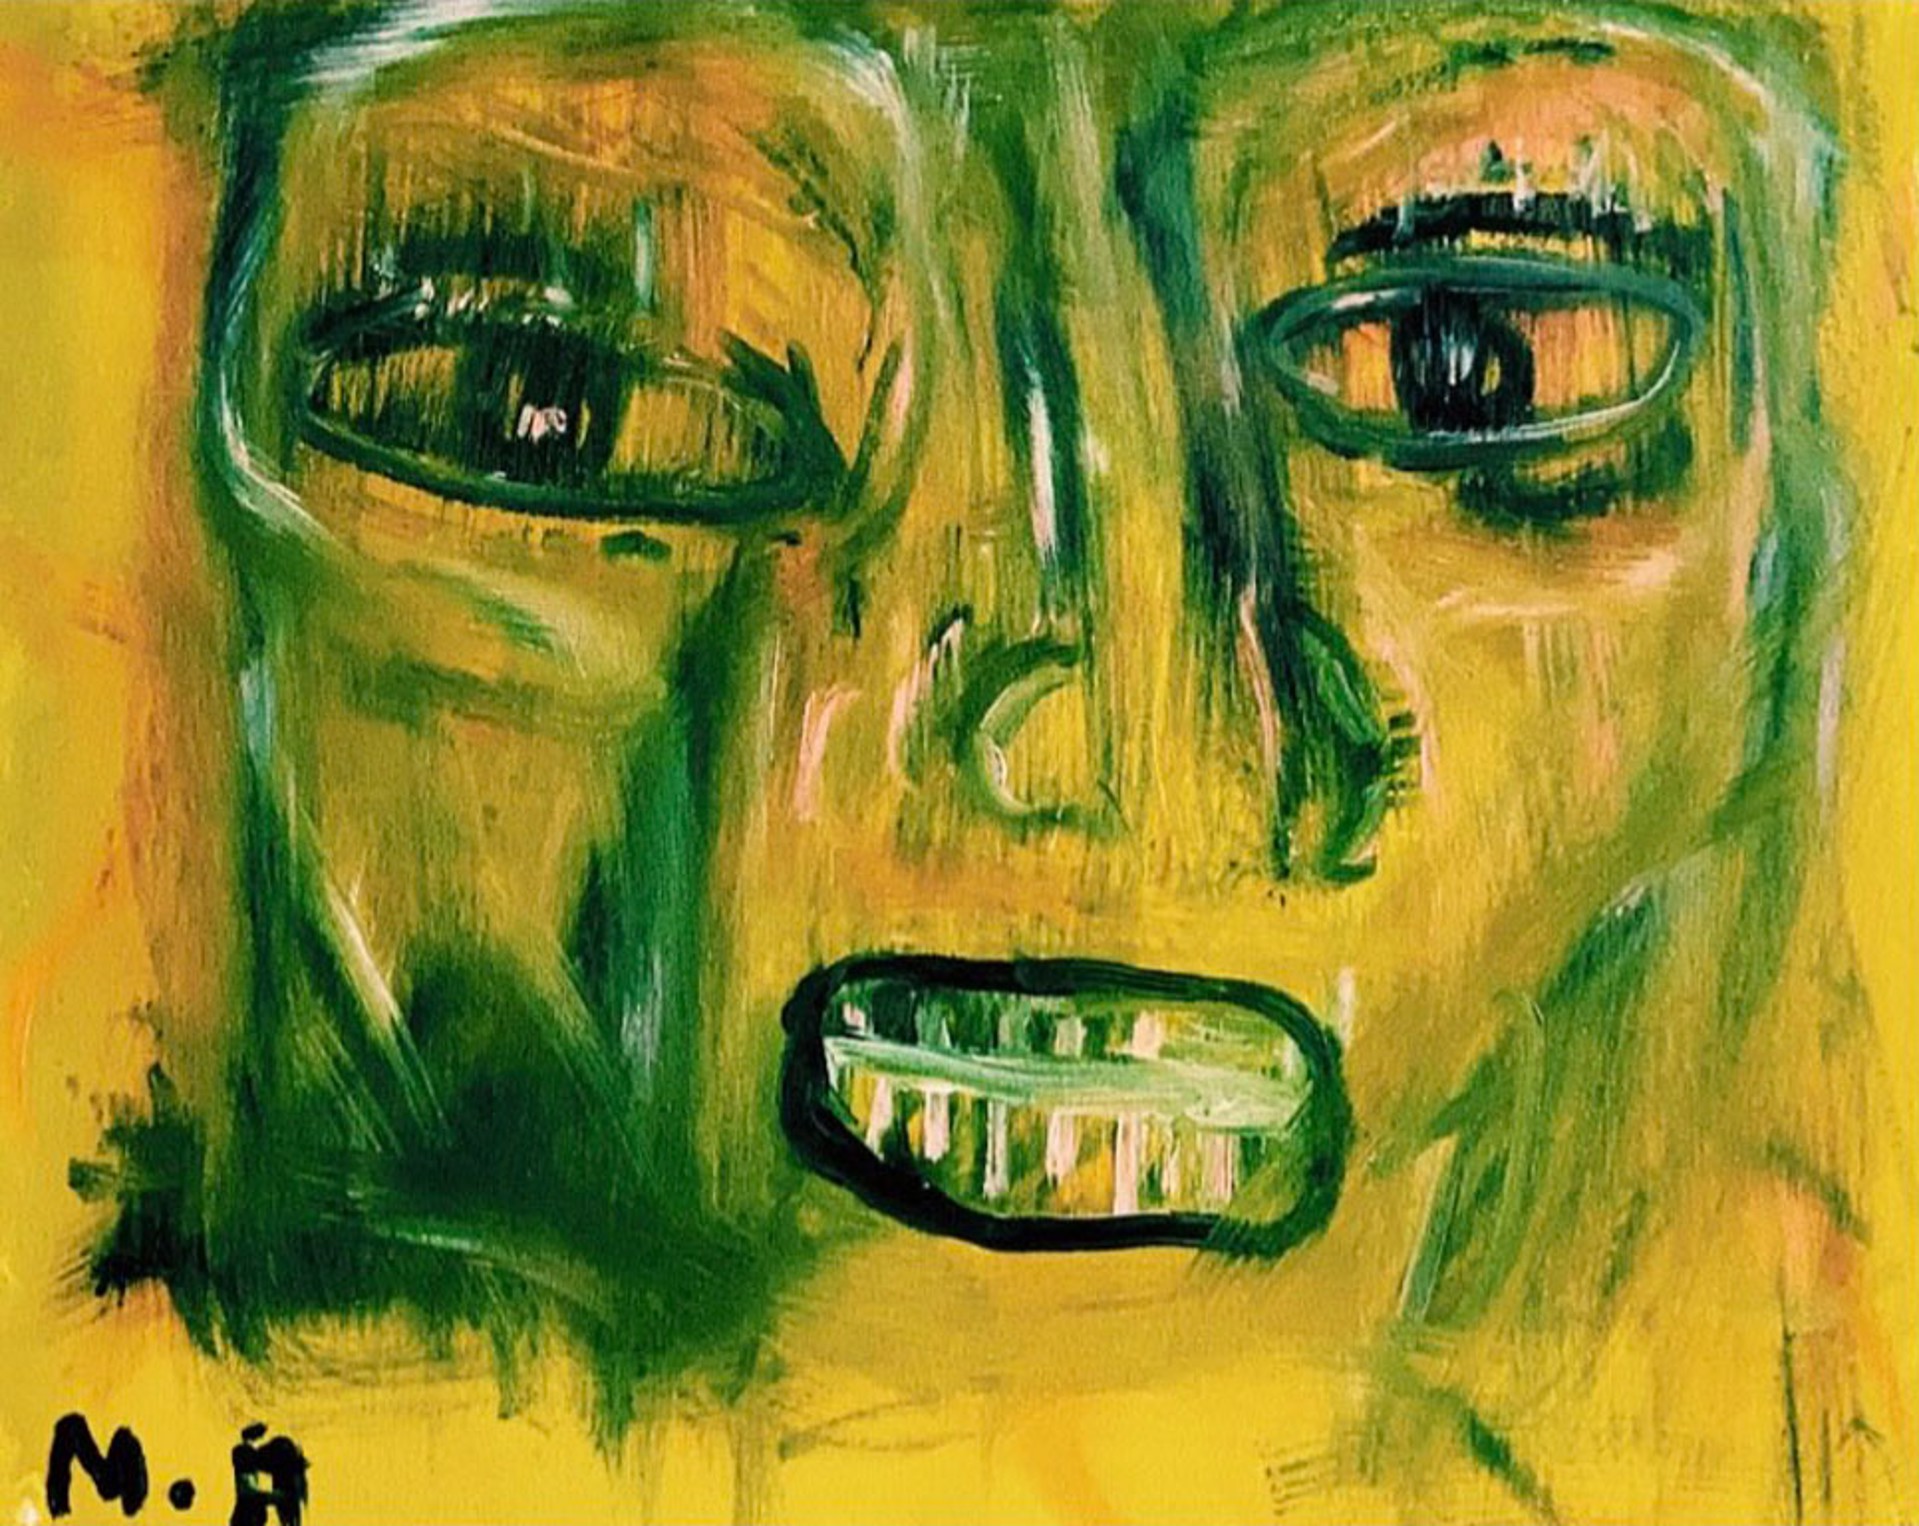 Untitled (green face) by Marc Andre